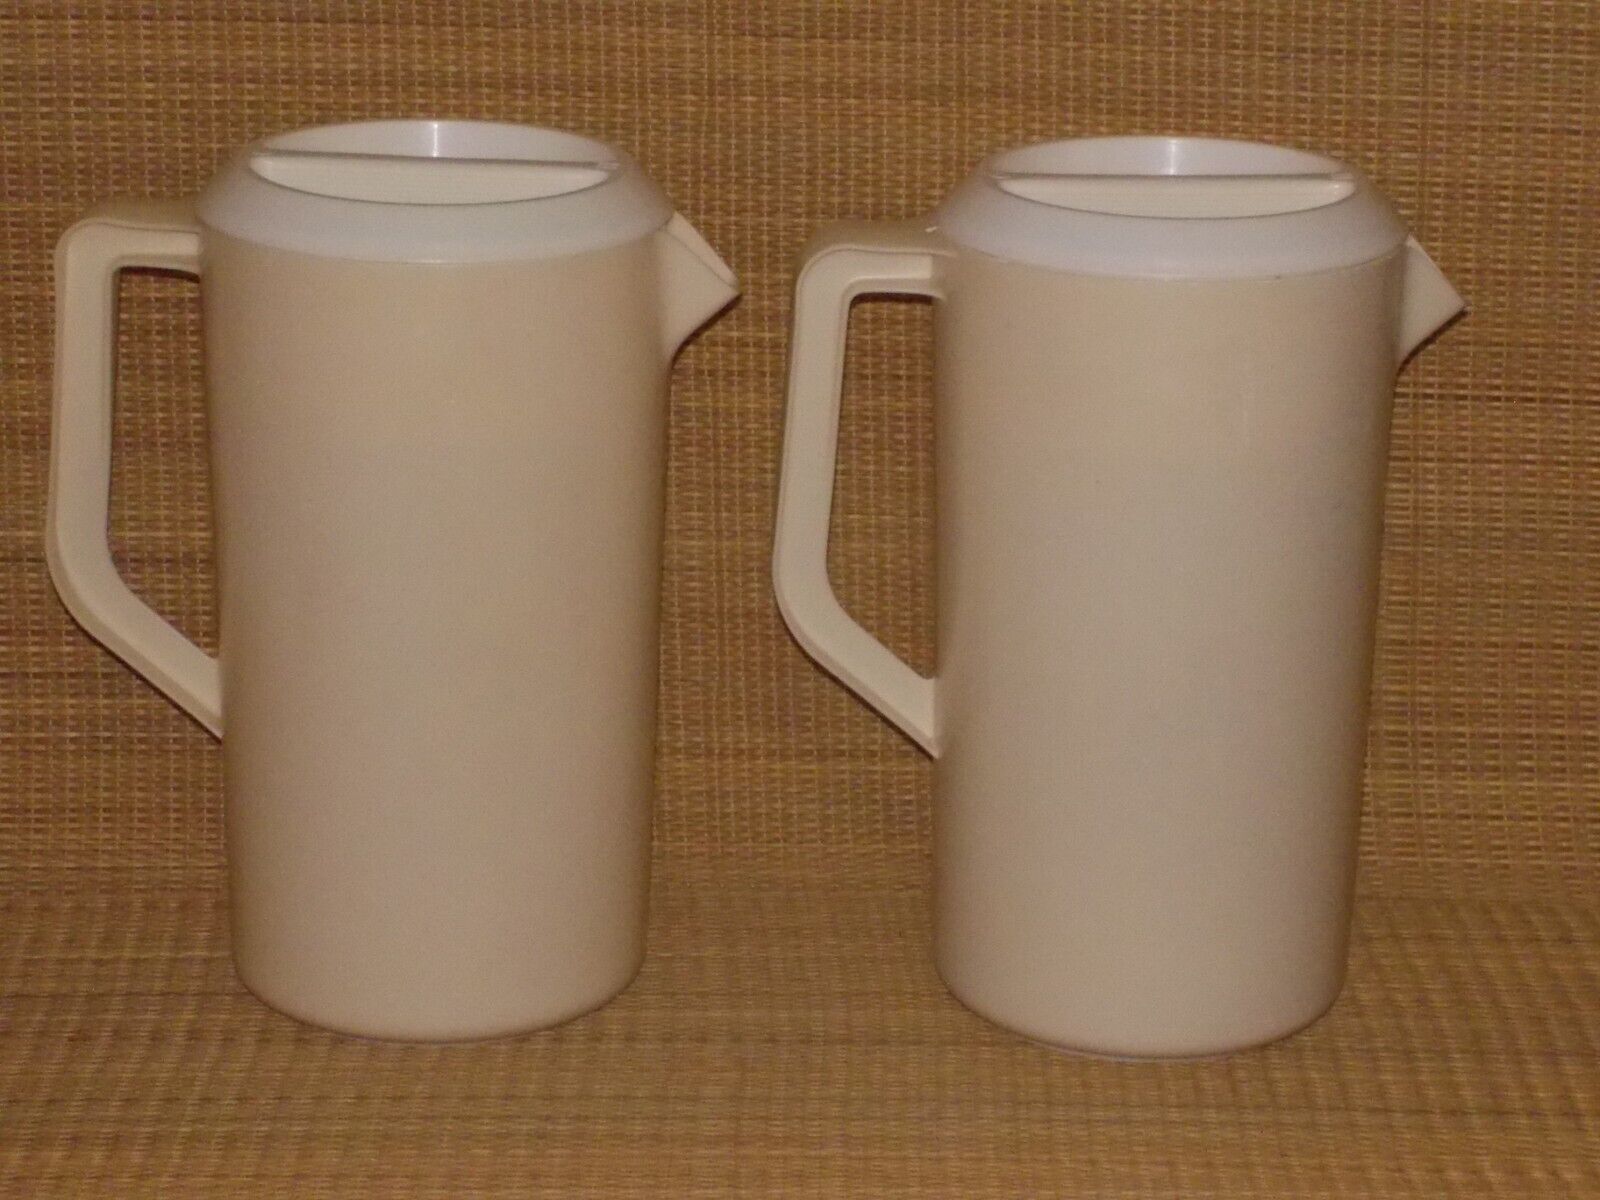 TWO Cream-Ivory-Almond Rubbermaid 2 1/4 Quart Pitchers 2445 + Lid clean PAIR LOT